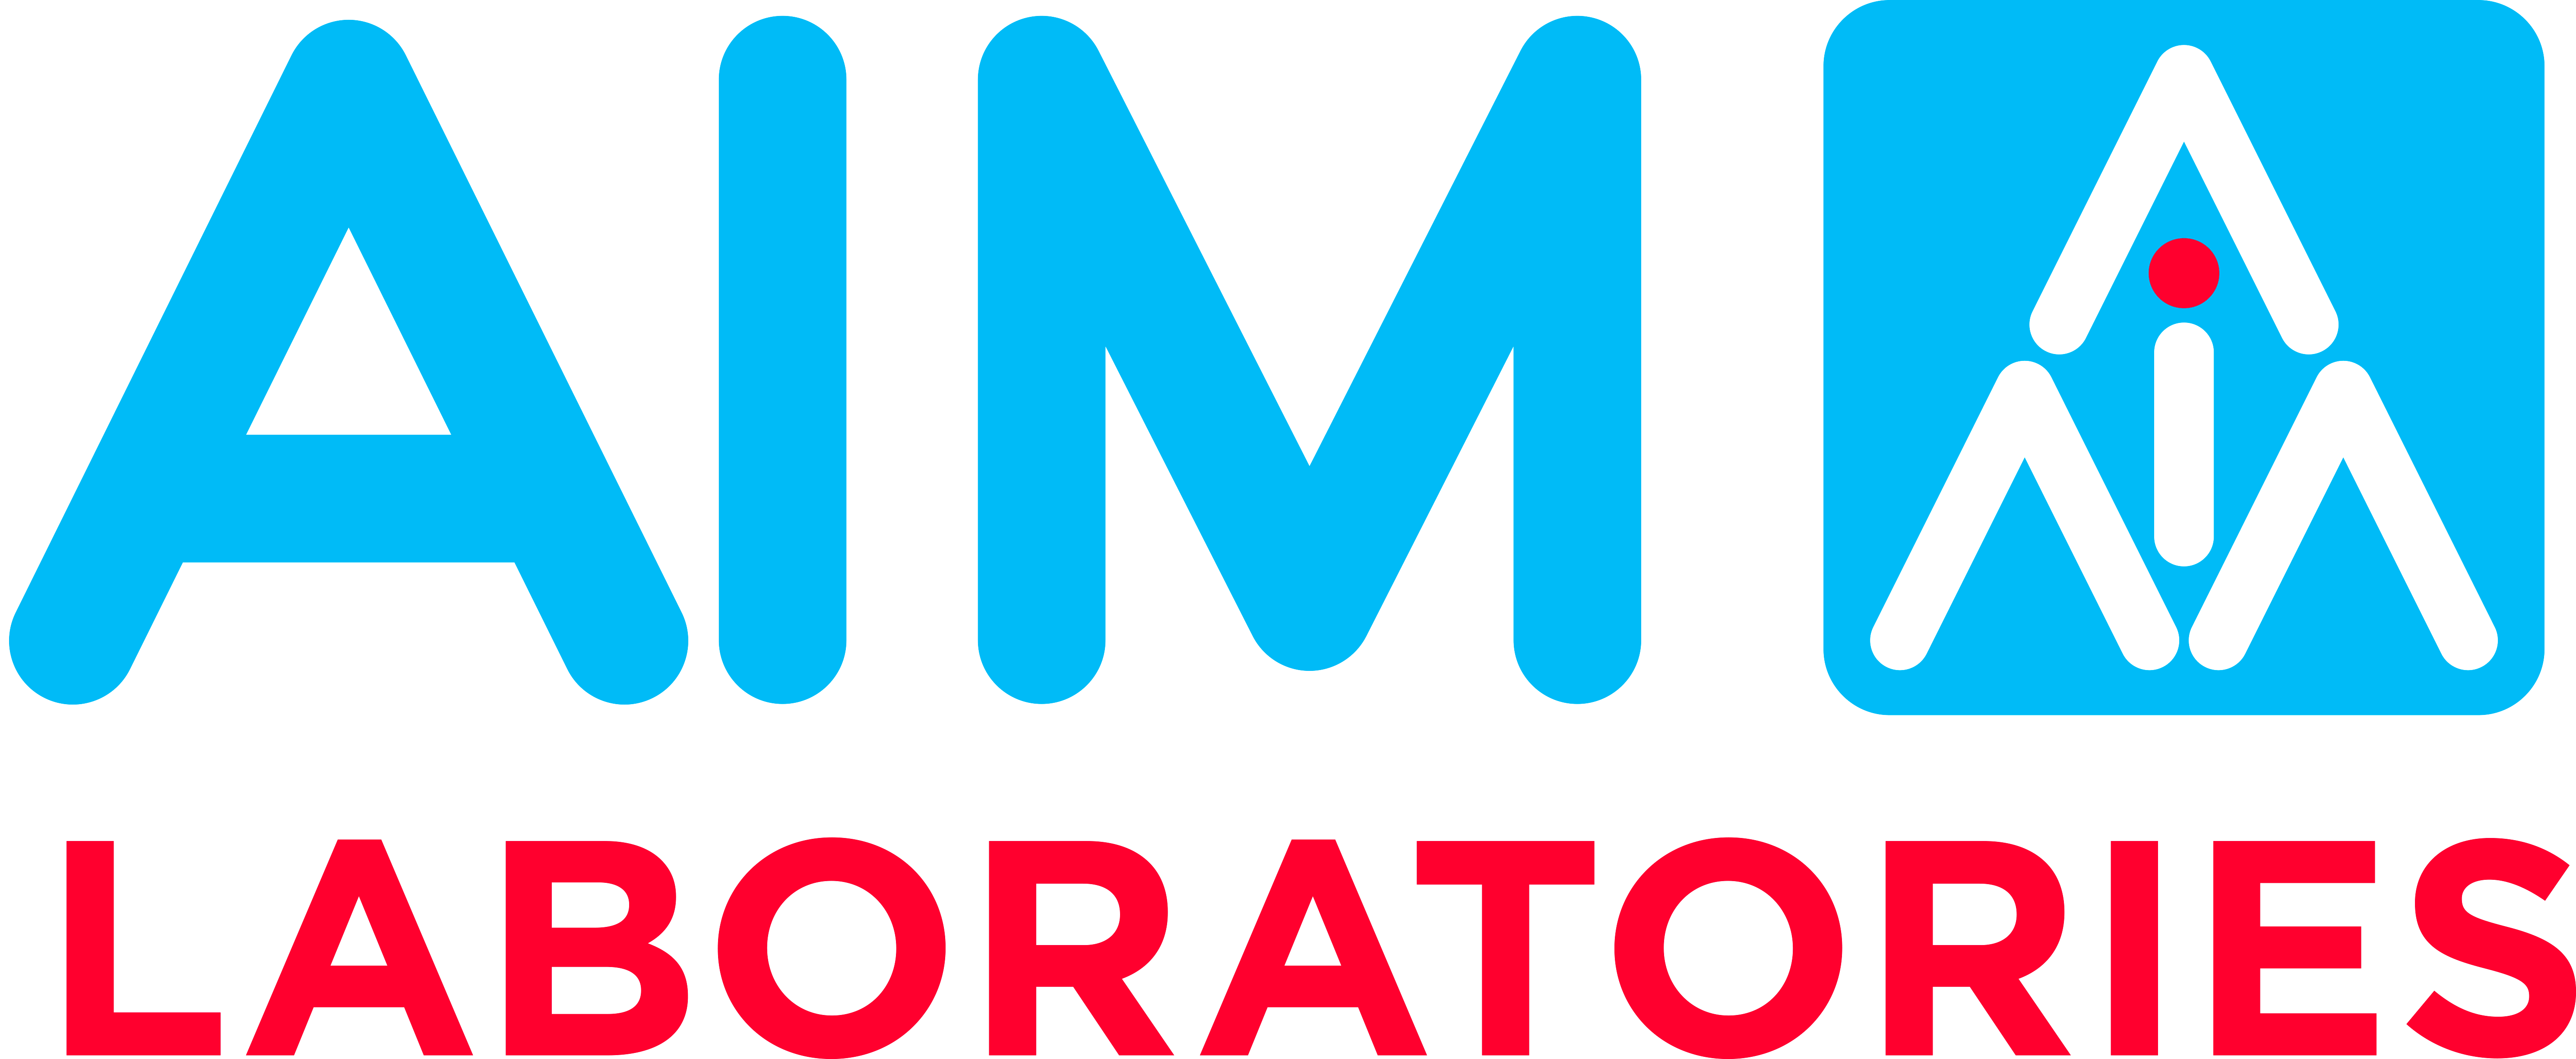 AIM Laboratories Signs Contract with State of Missouri to Provide COVID-19 Testing for Fulton Hospital